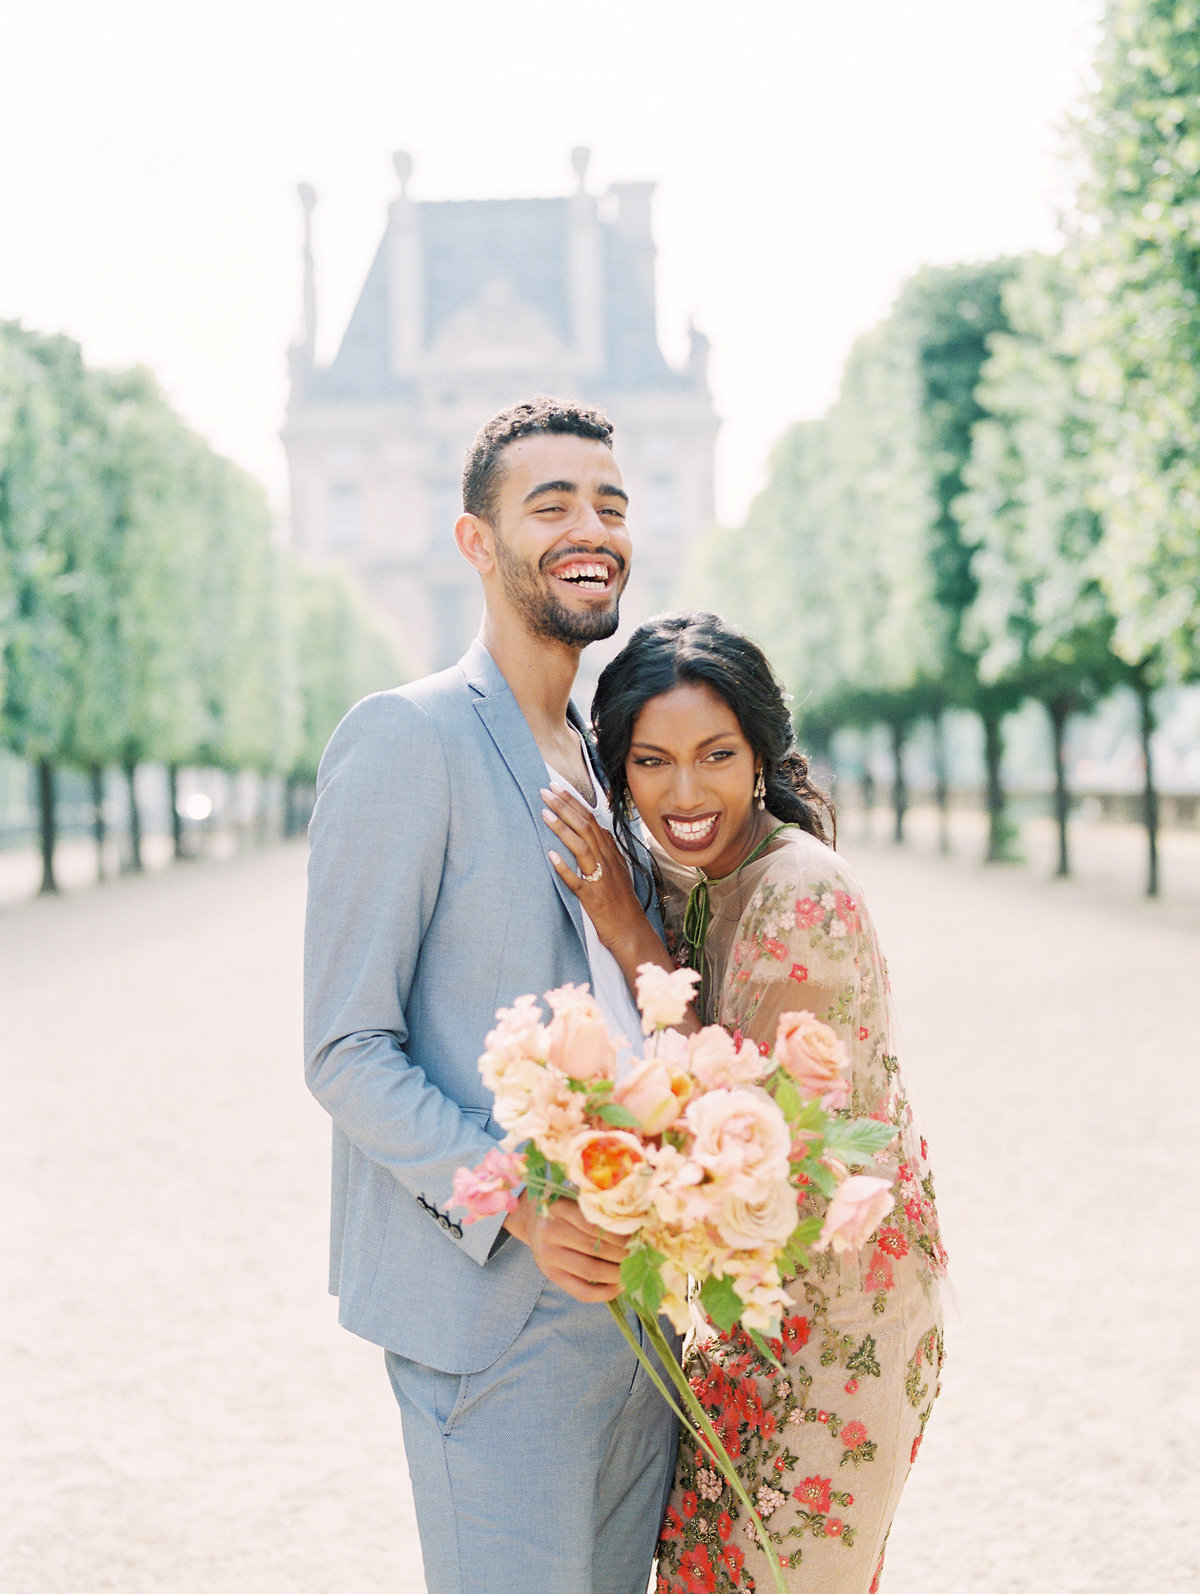 Marchesa Gown-Engagement in Paris, France at the Tuileries